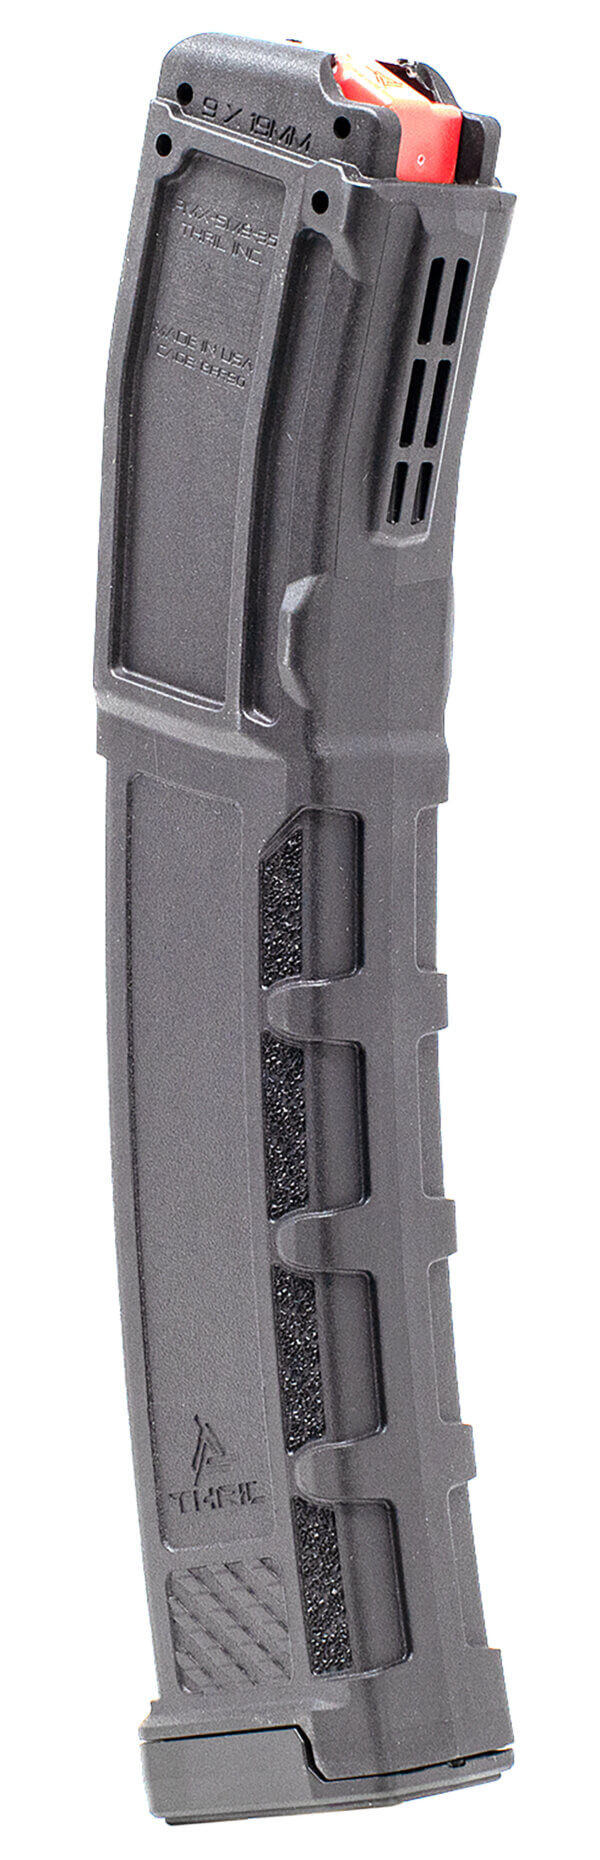 Warne MEG1932BLK Magazine Extension  made of 6061-T6 Aluminum with Hardcoat Anodized Black Finish for Glock 19  23 Magazines (Adds 3rds 9mm Luger  2rds 40 S&W)